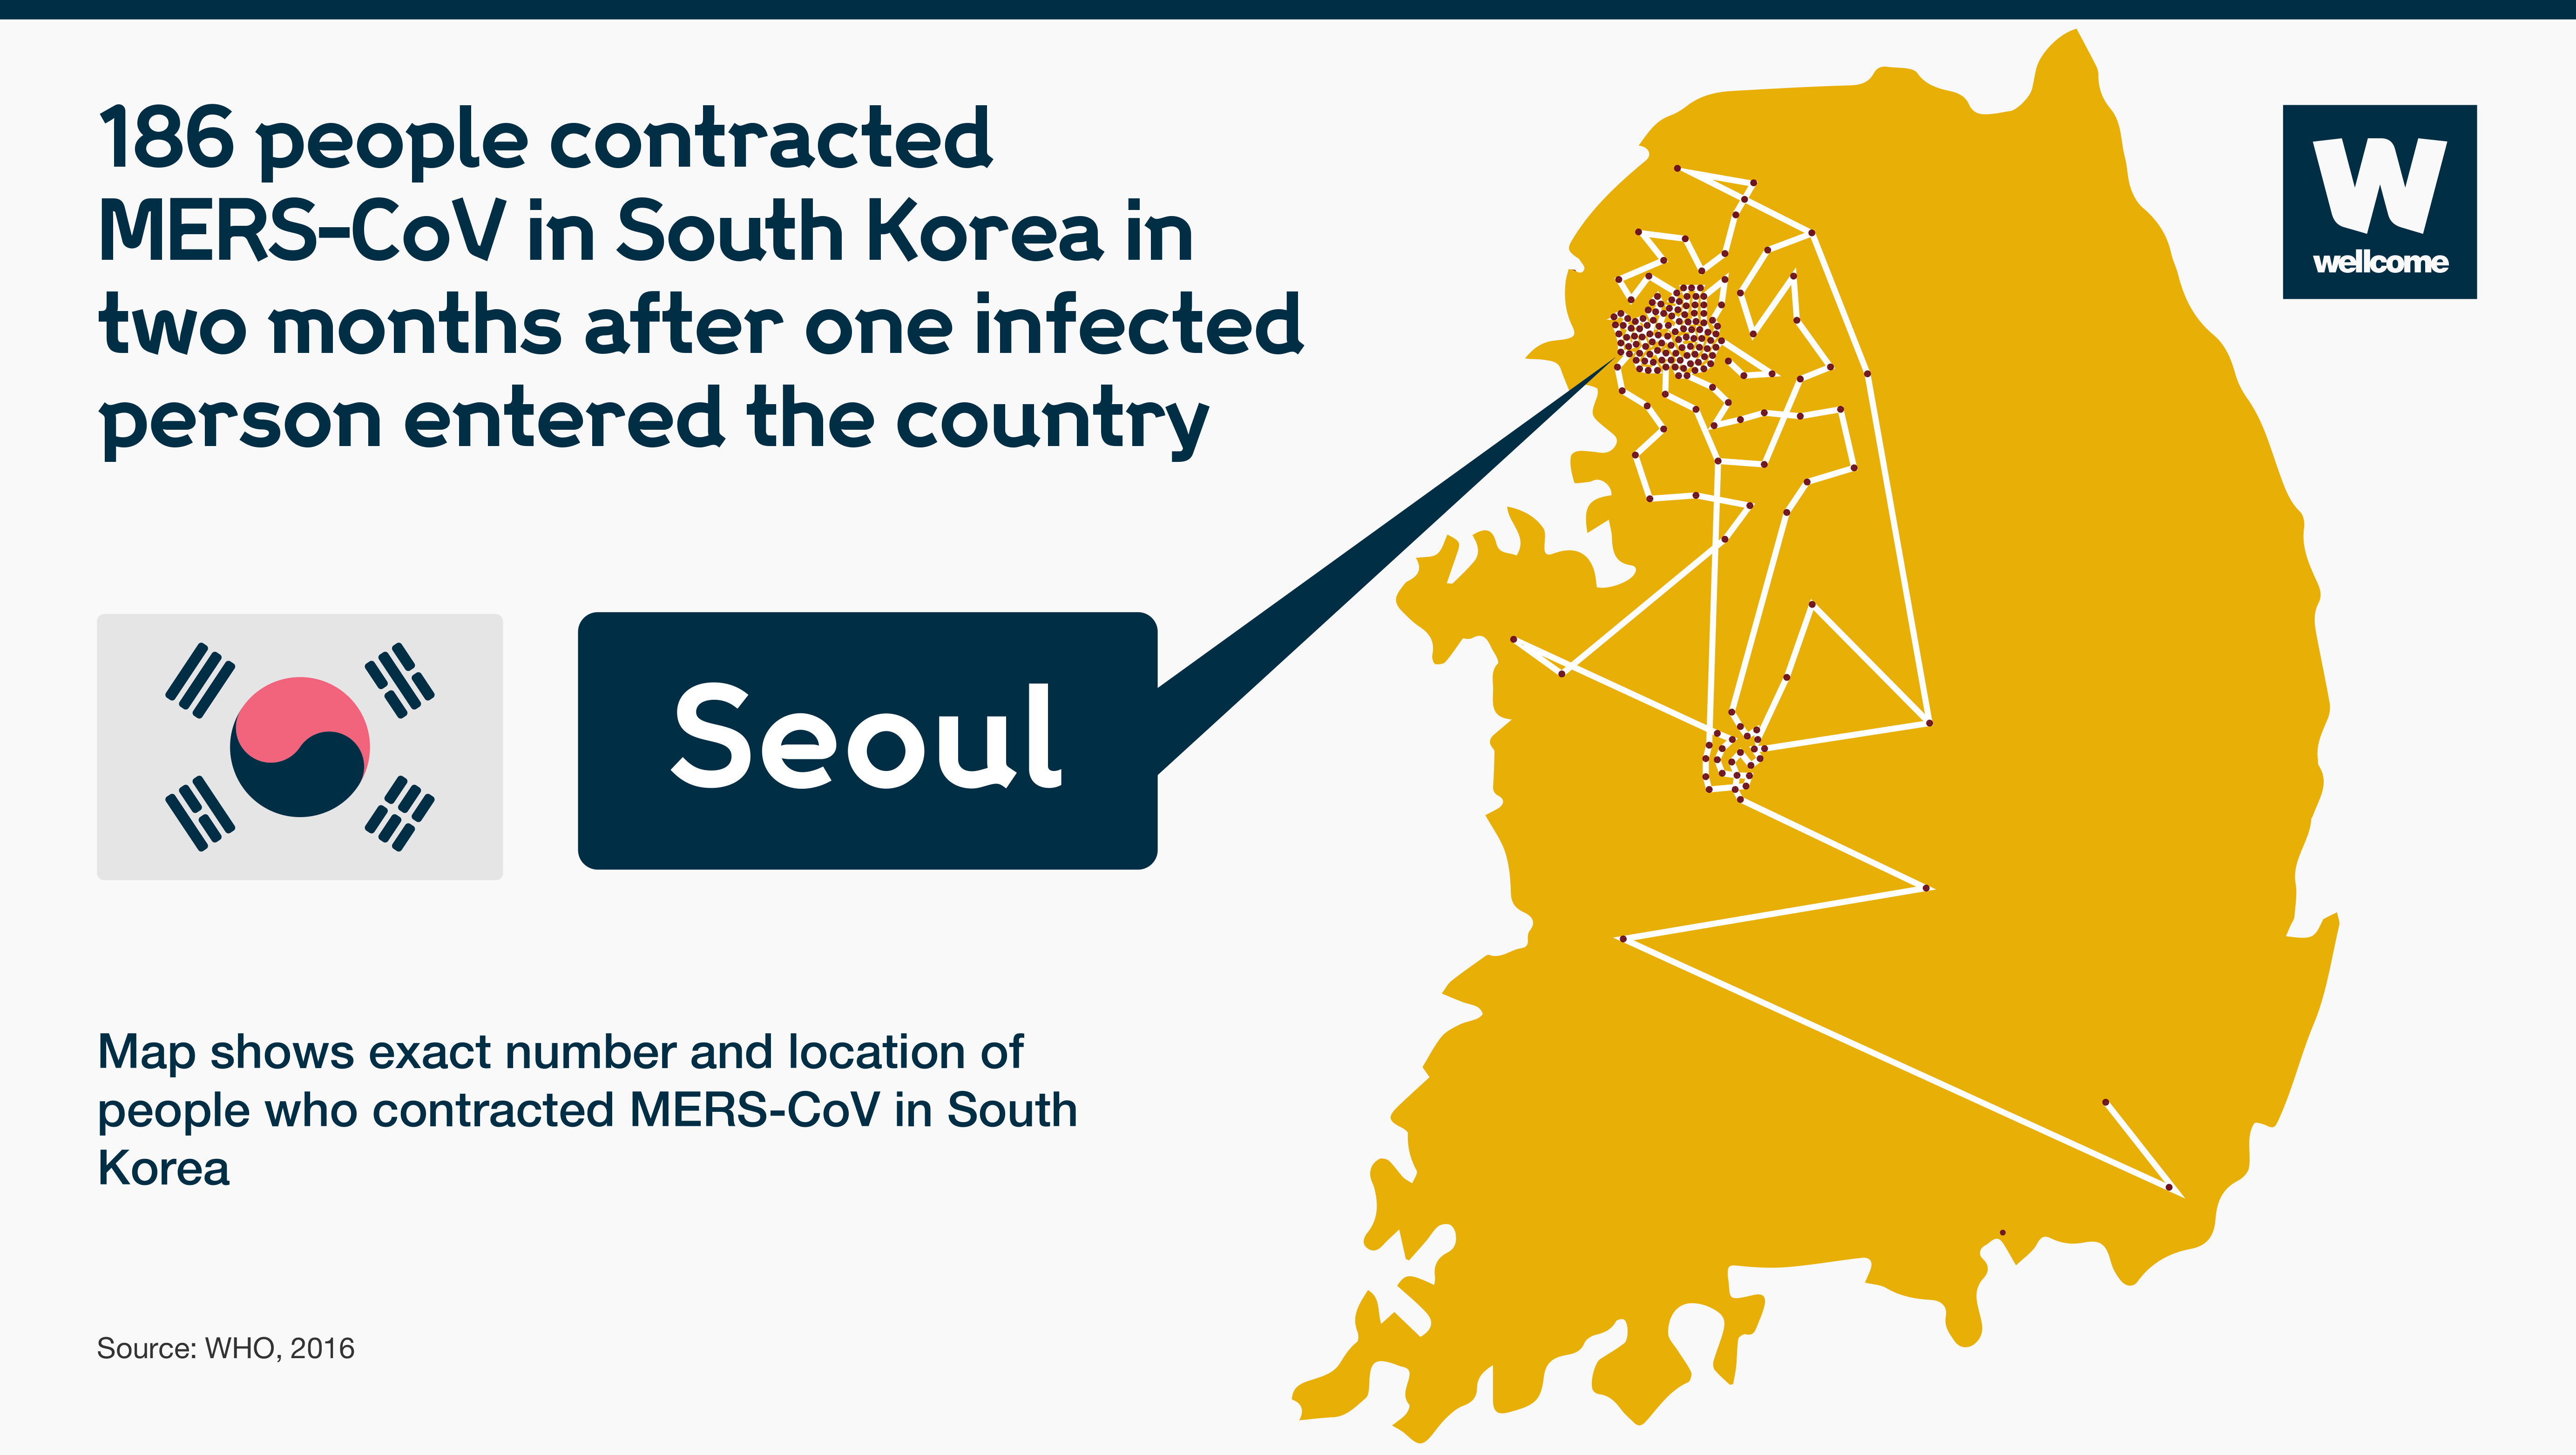 Chart to show how MERS-CoV spread through South Korea in two months.